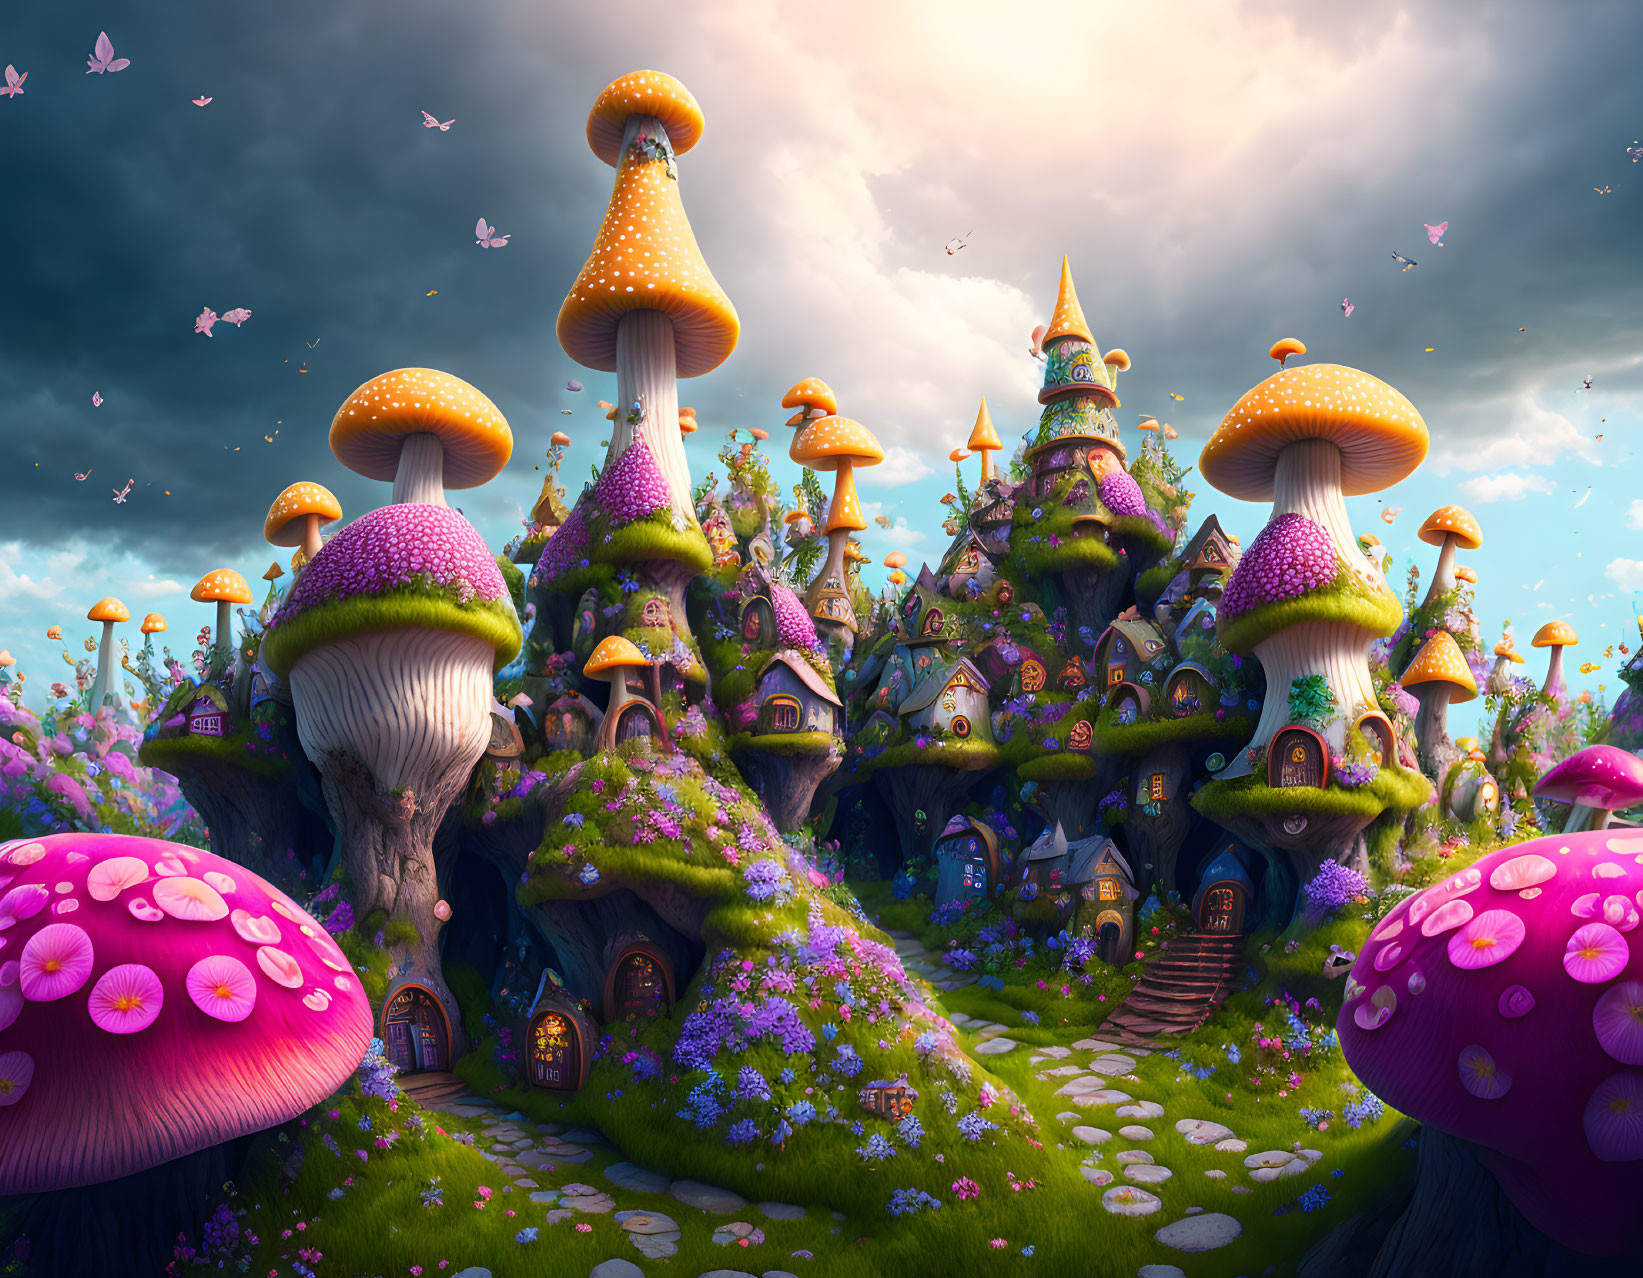 Fantasy landscape with mushroom houses, cobblestone path, lush greenery, and butterflies